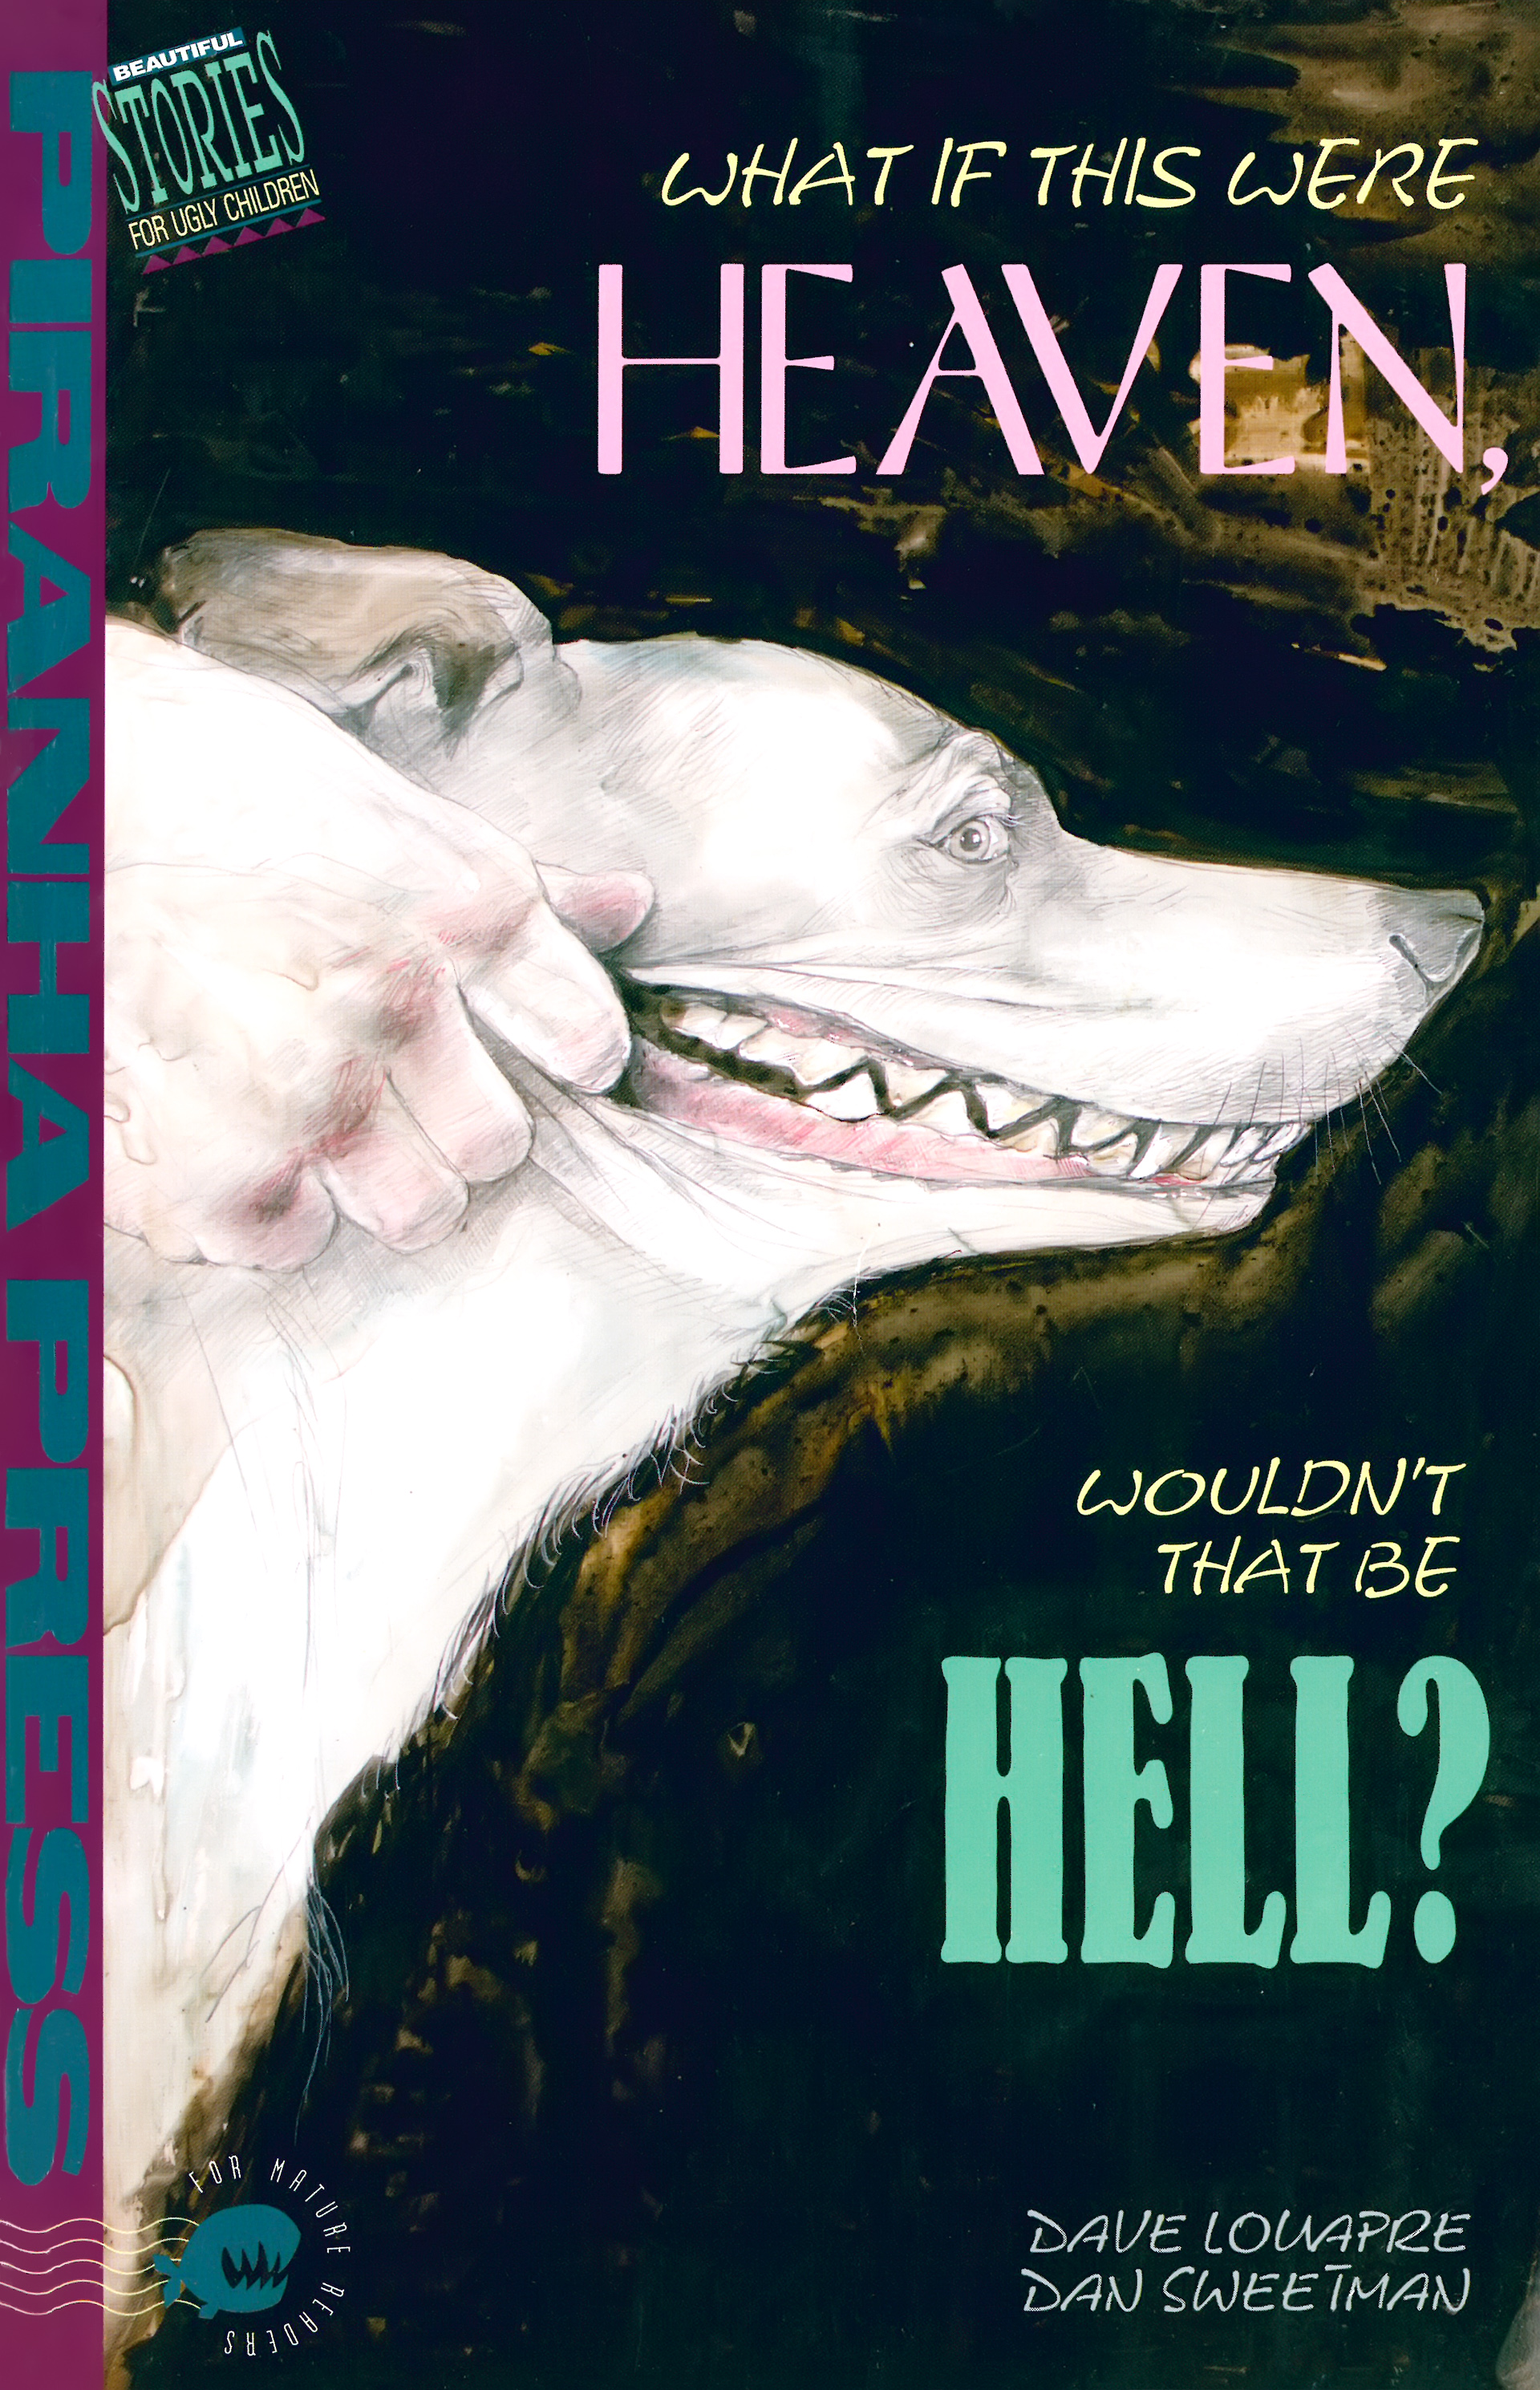 Read online What If This Were Heaven, Wouldn't That Be Hell? comic -  Issue # Full - 1